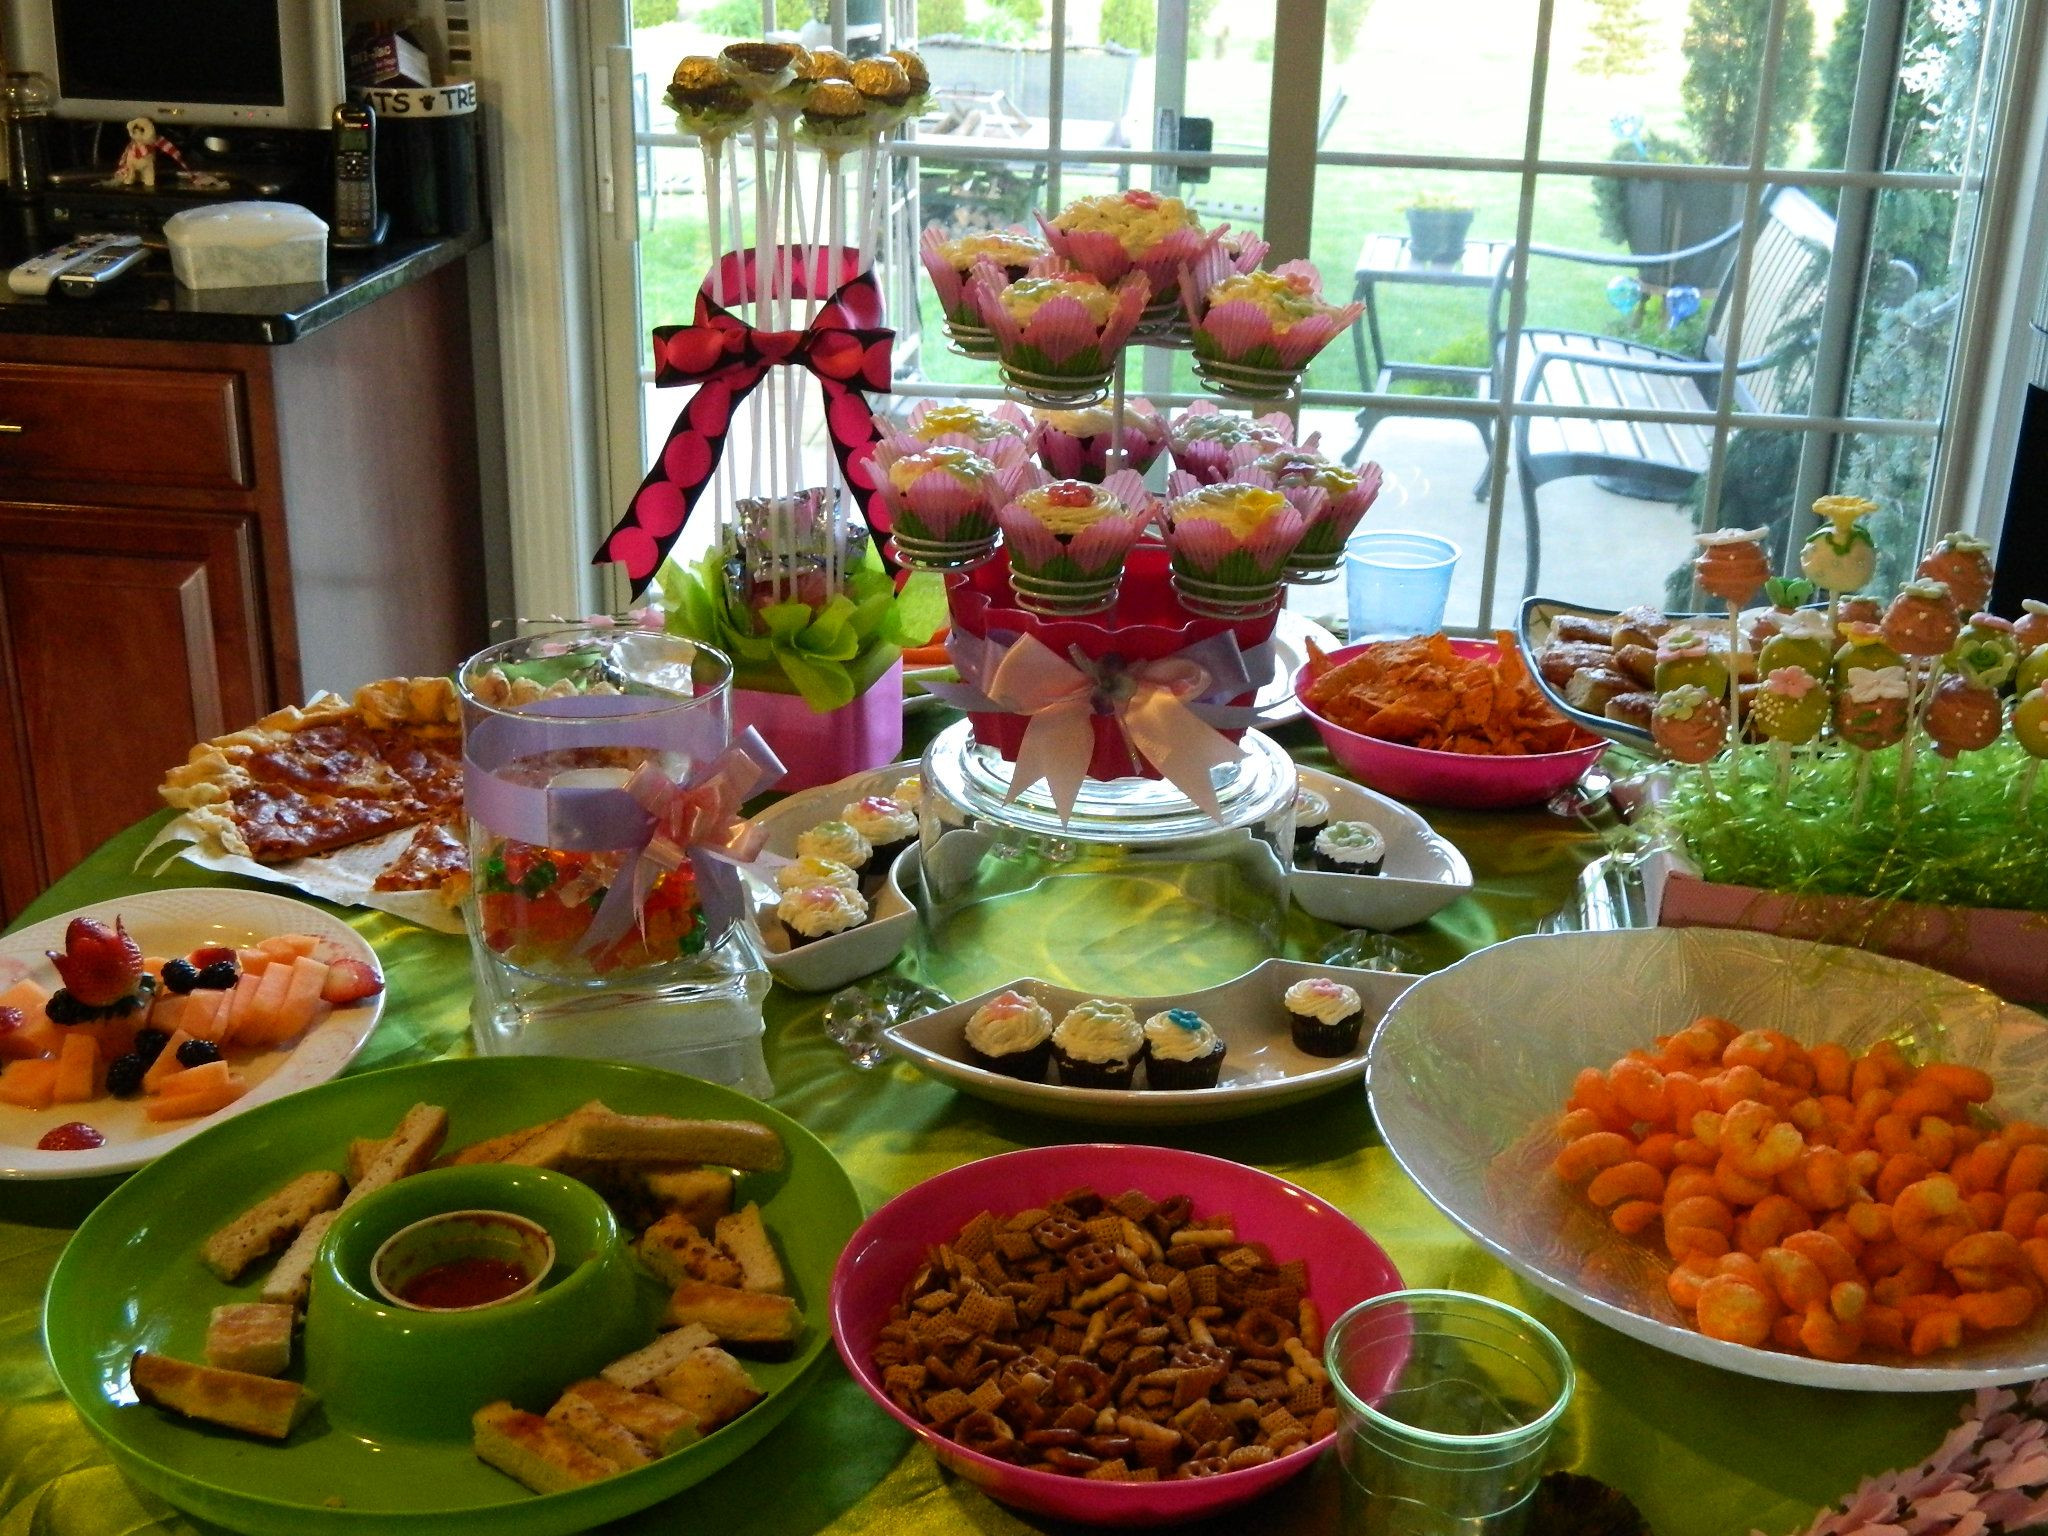 24 Of the Best Ideas for 16th Birthday Party Food Ideas Home, Family